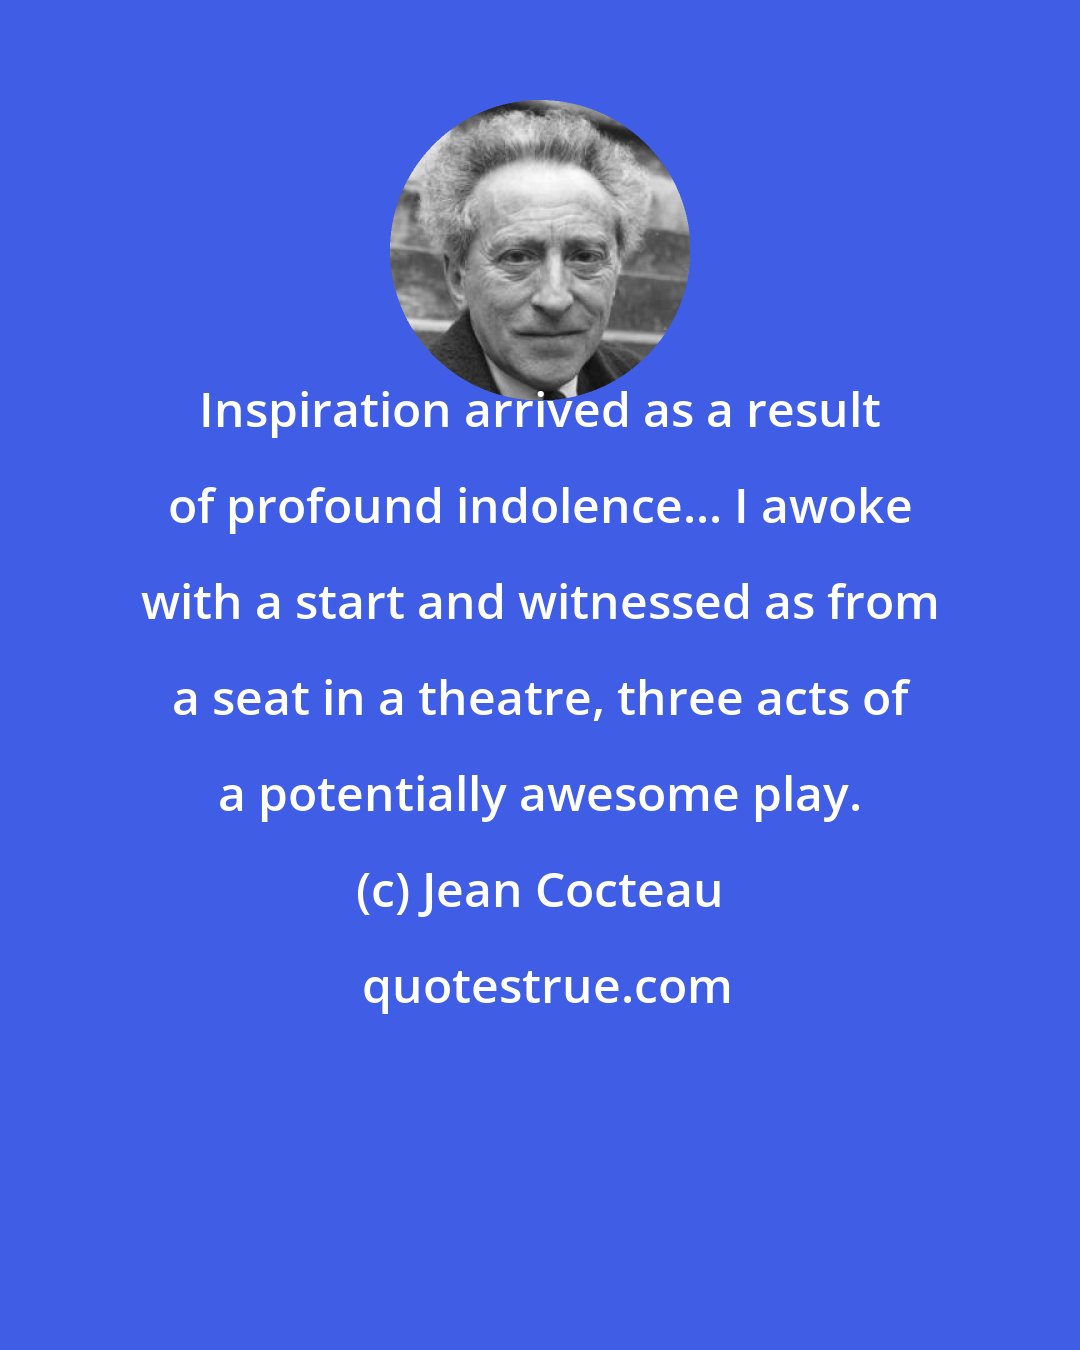 Jean Cocteau: Inspiration arrived as a result of profound indolence... I awoke with a start and witnessed as from a seat in a theatre, three acts of a potentially awesome play.